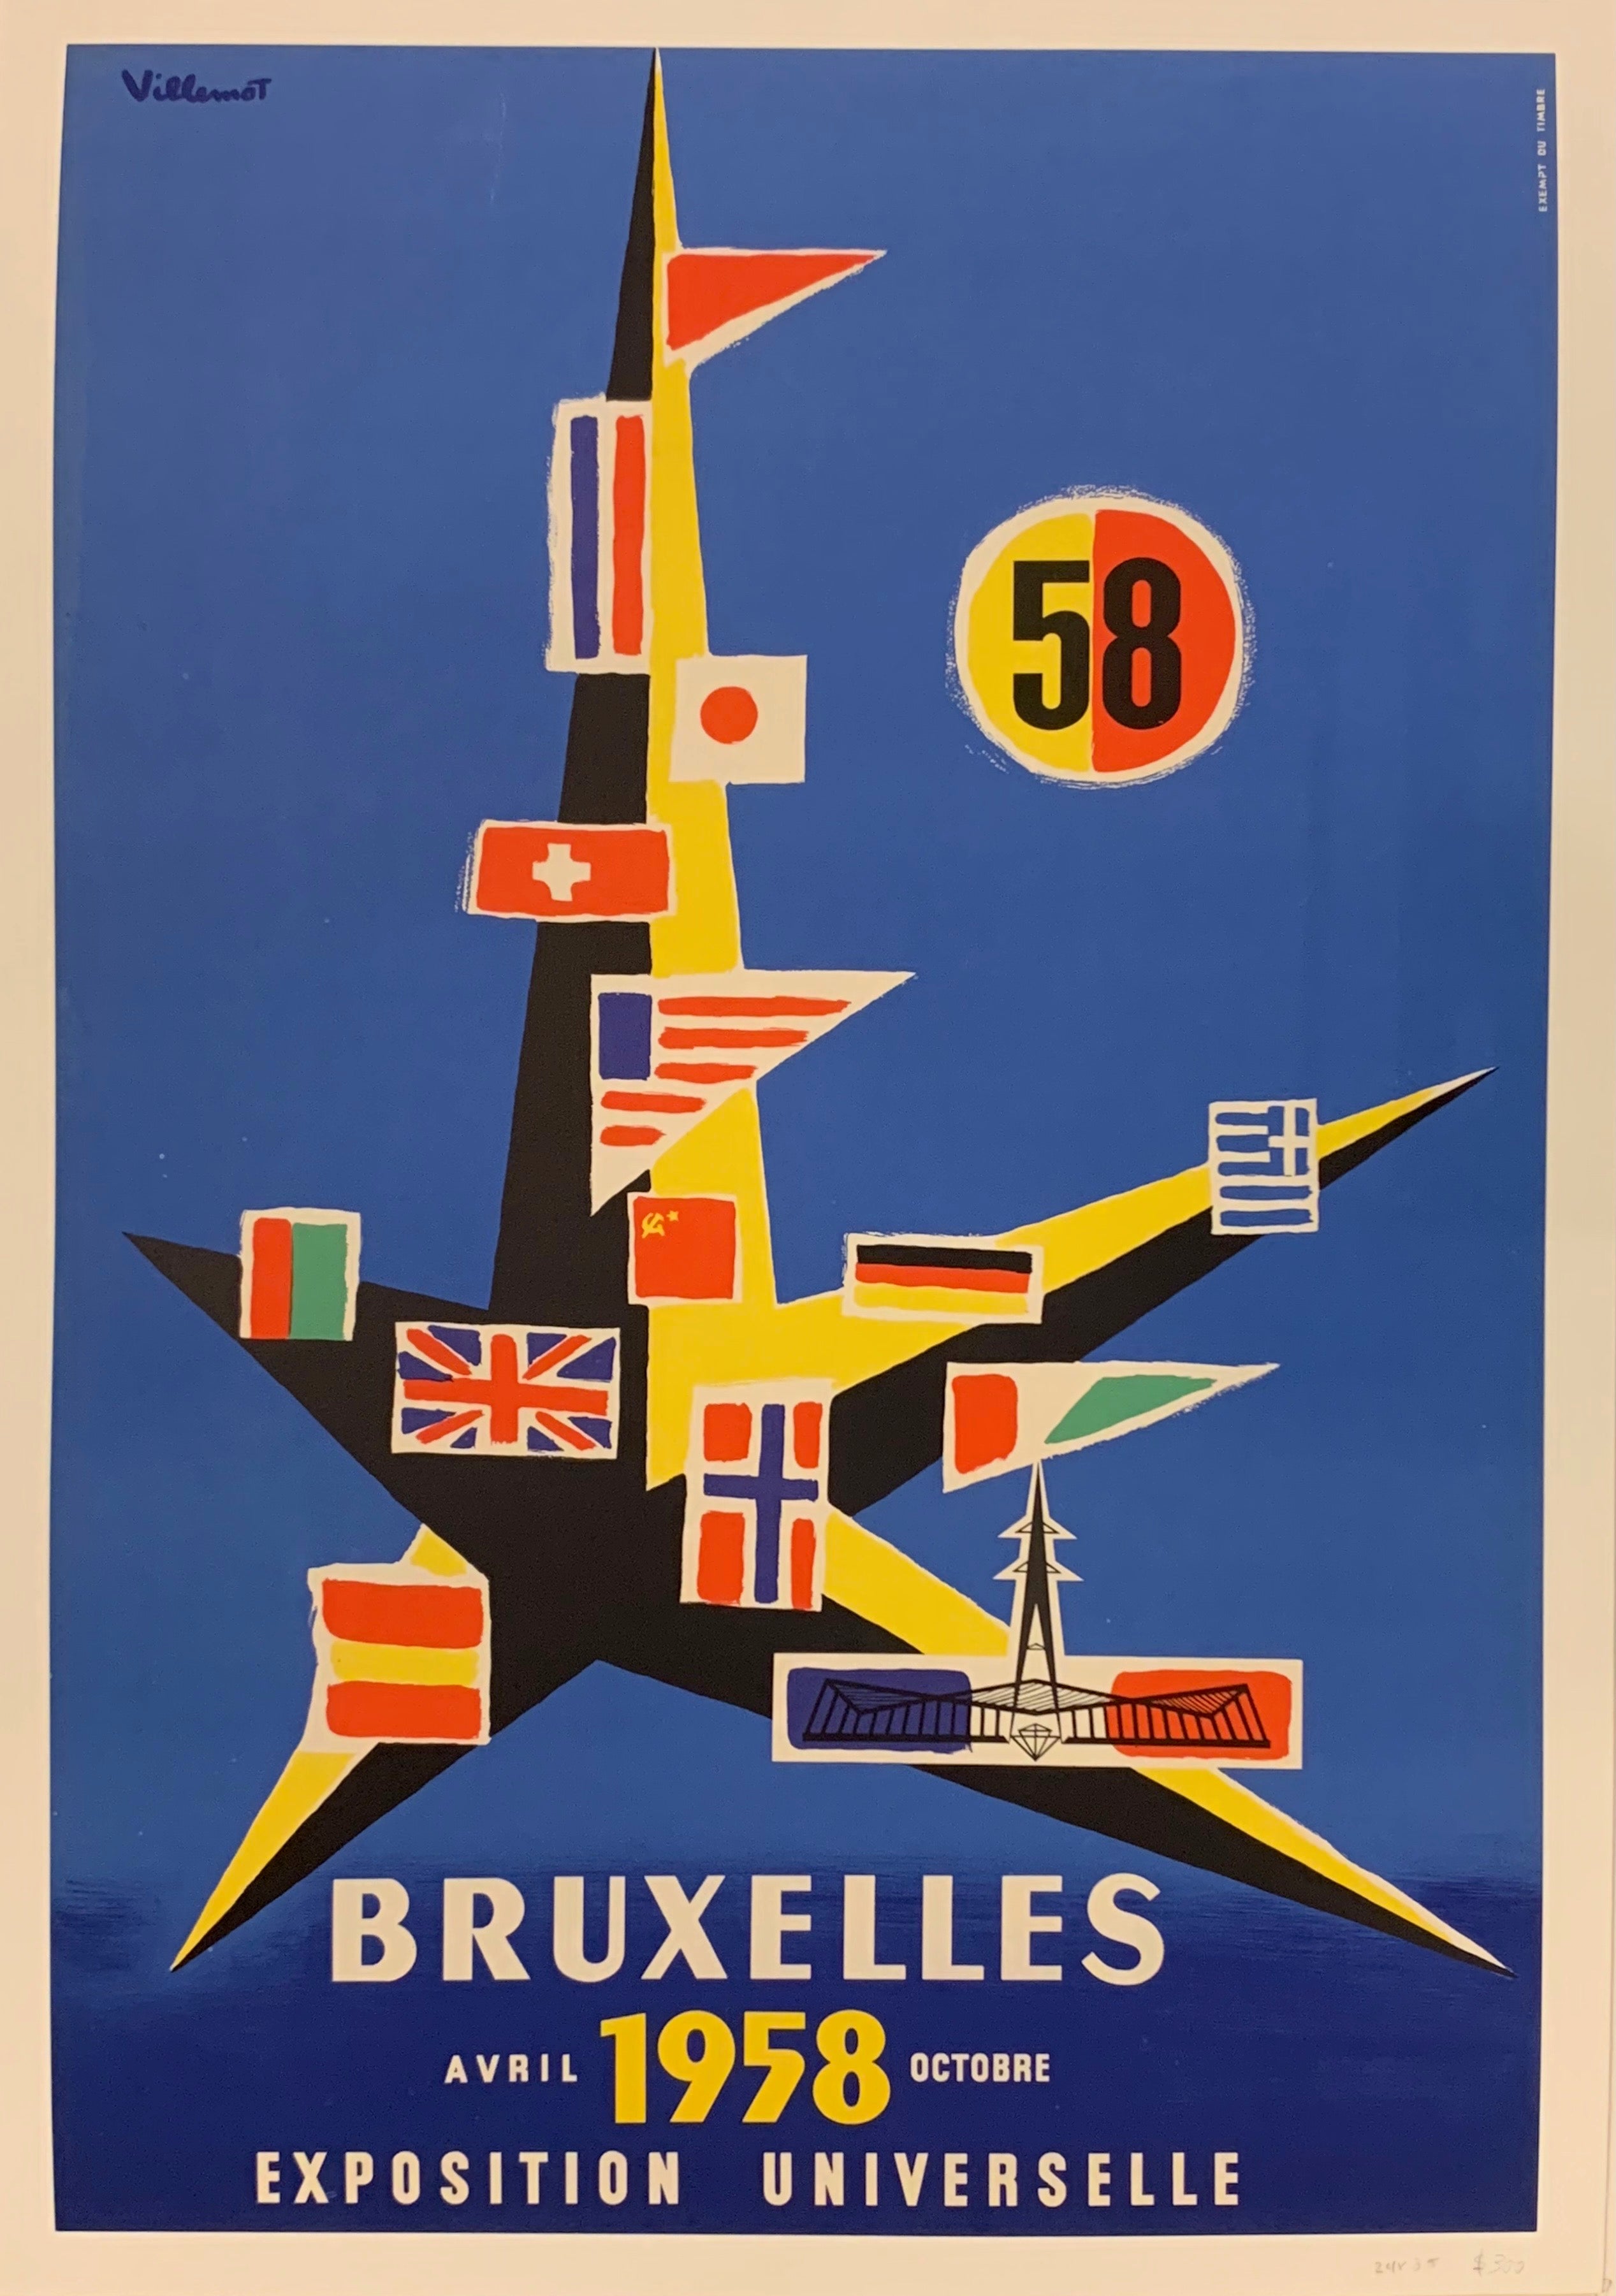 Bruxelles Exposition Universelle Poster ✓